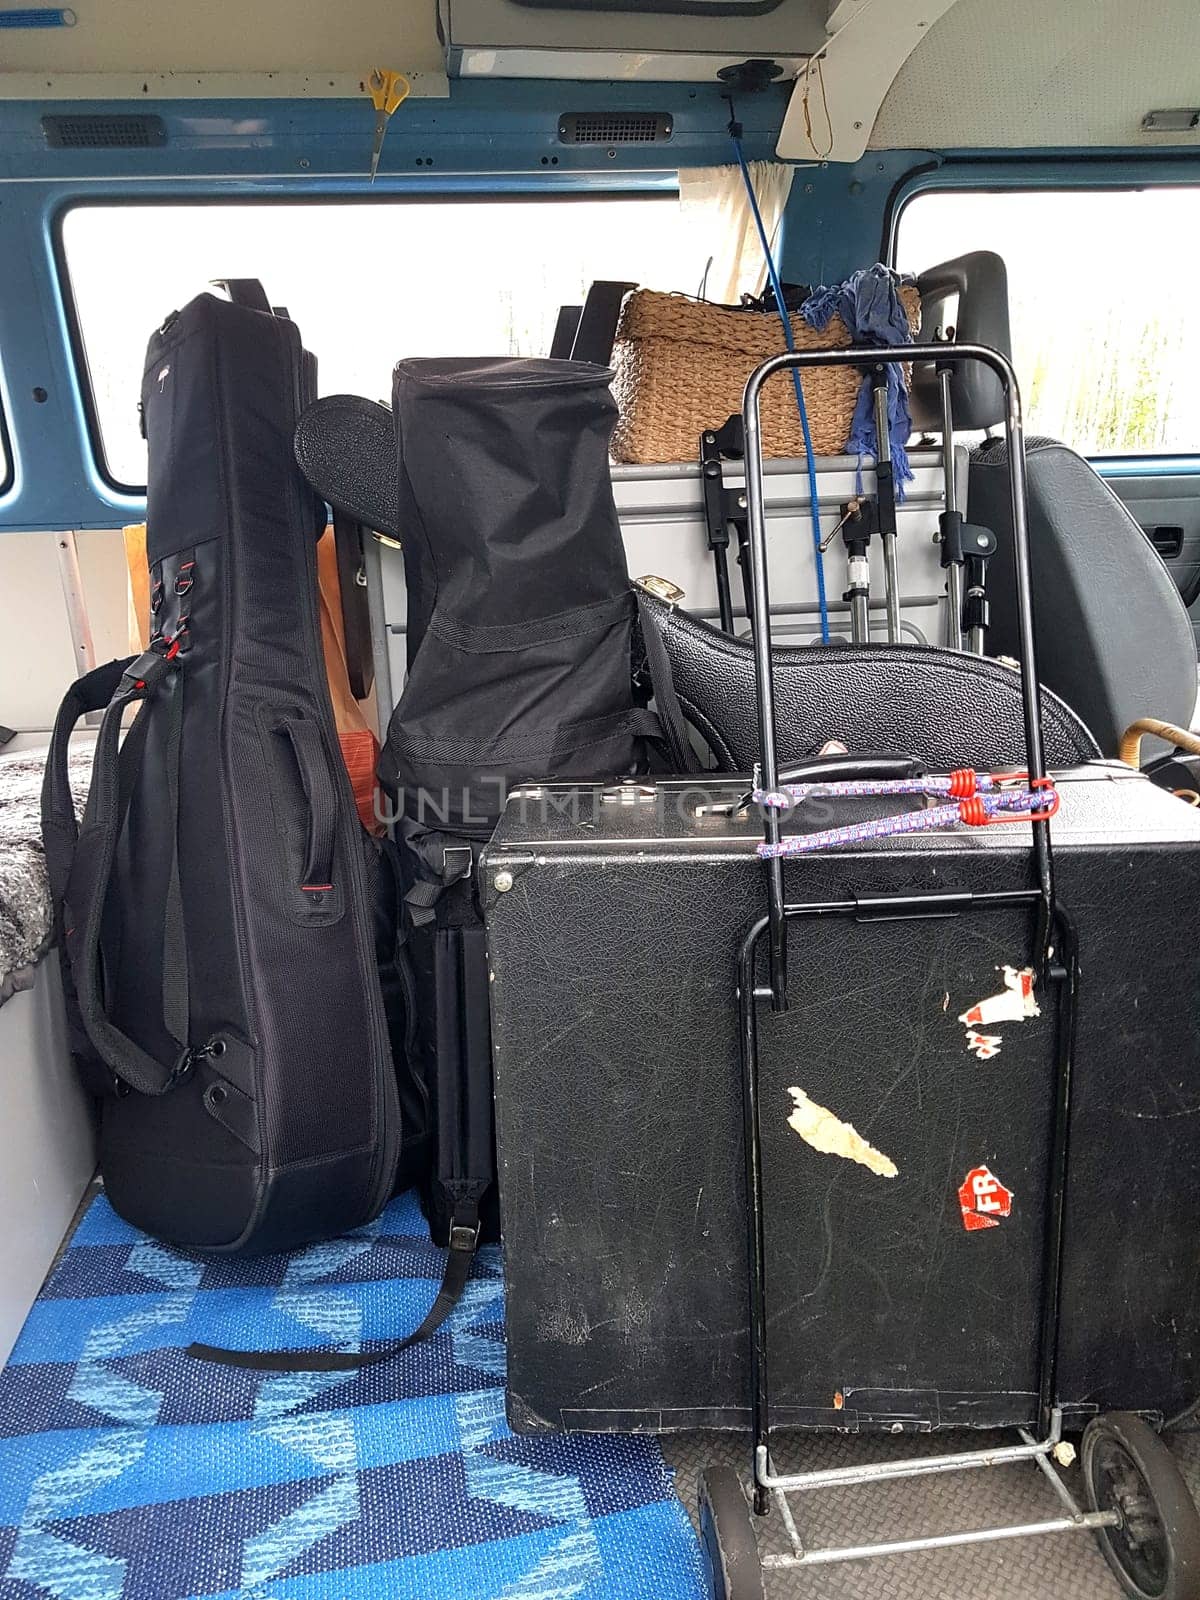 The instruments in the cases are loaded into the van. by Jamaladeen